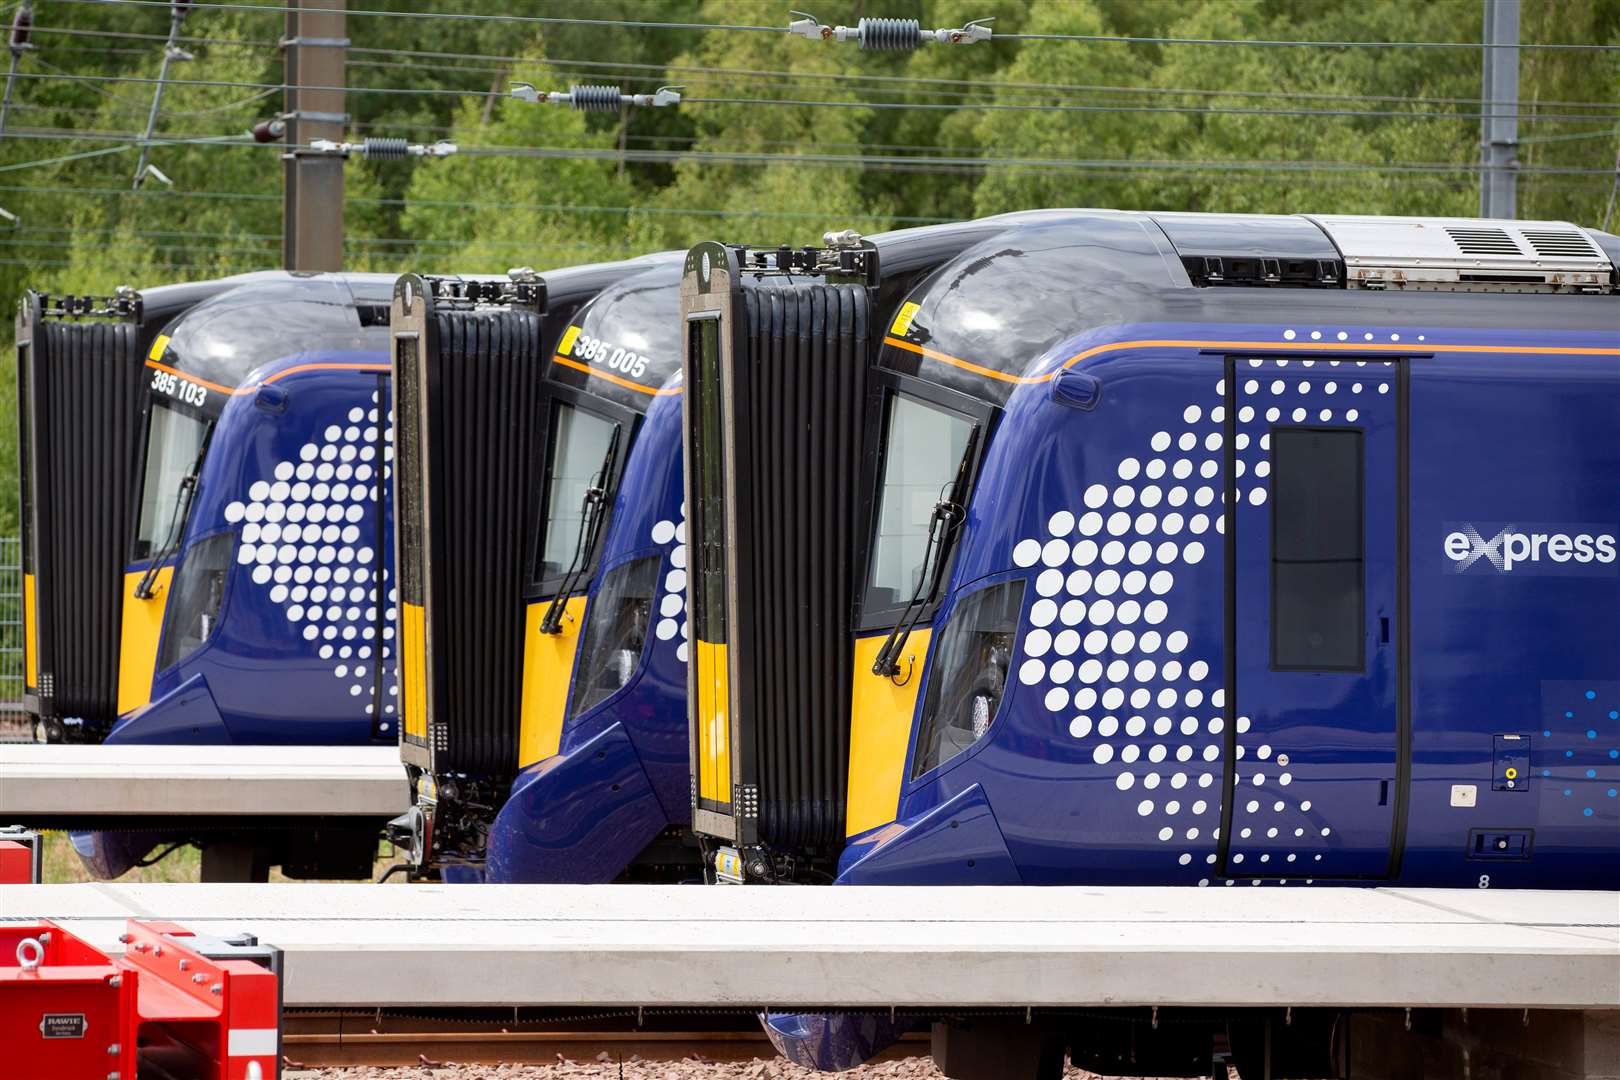 The new Class 385 trains are part of reasons for improvements on Scotland's rail network